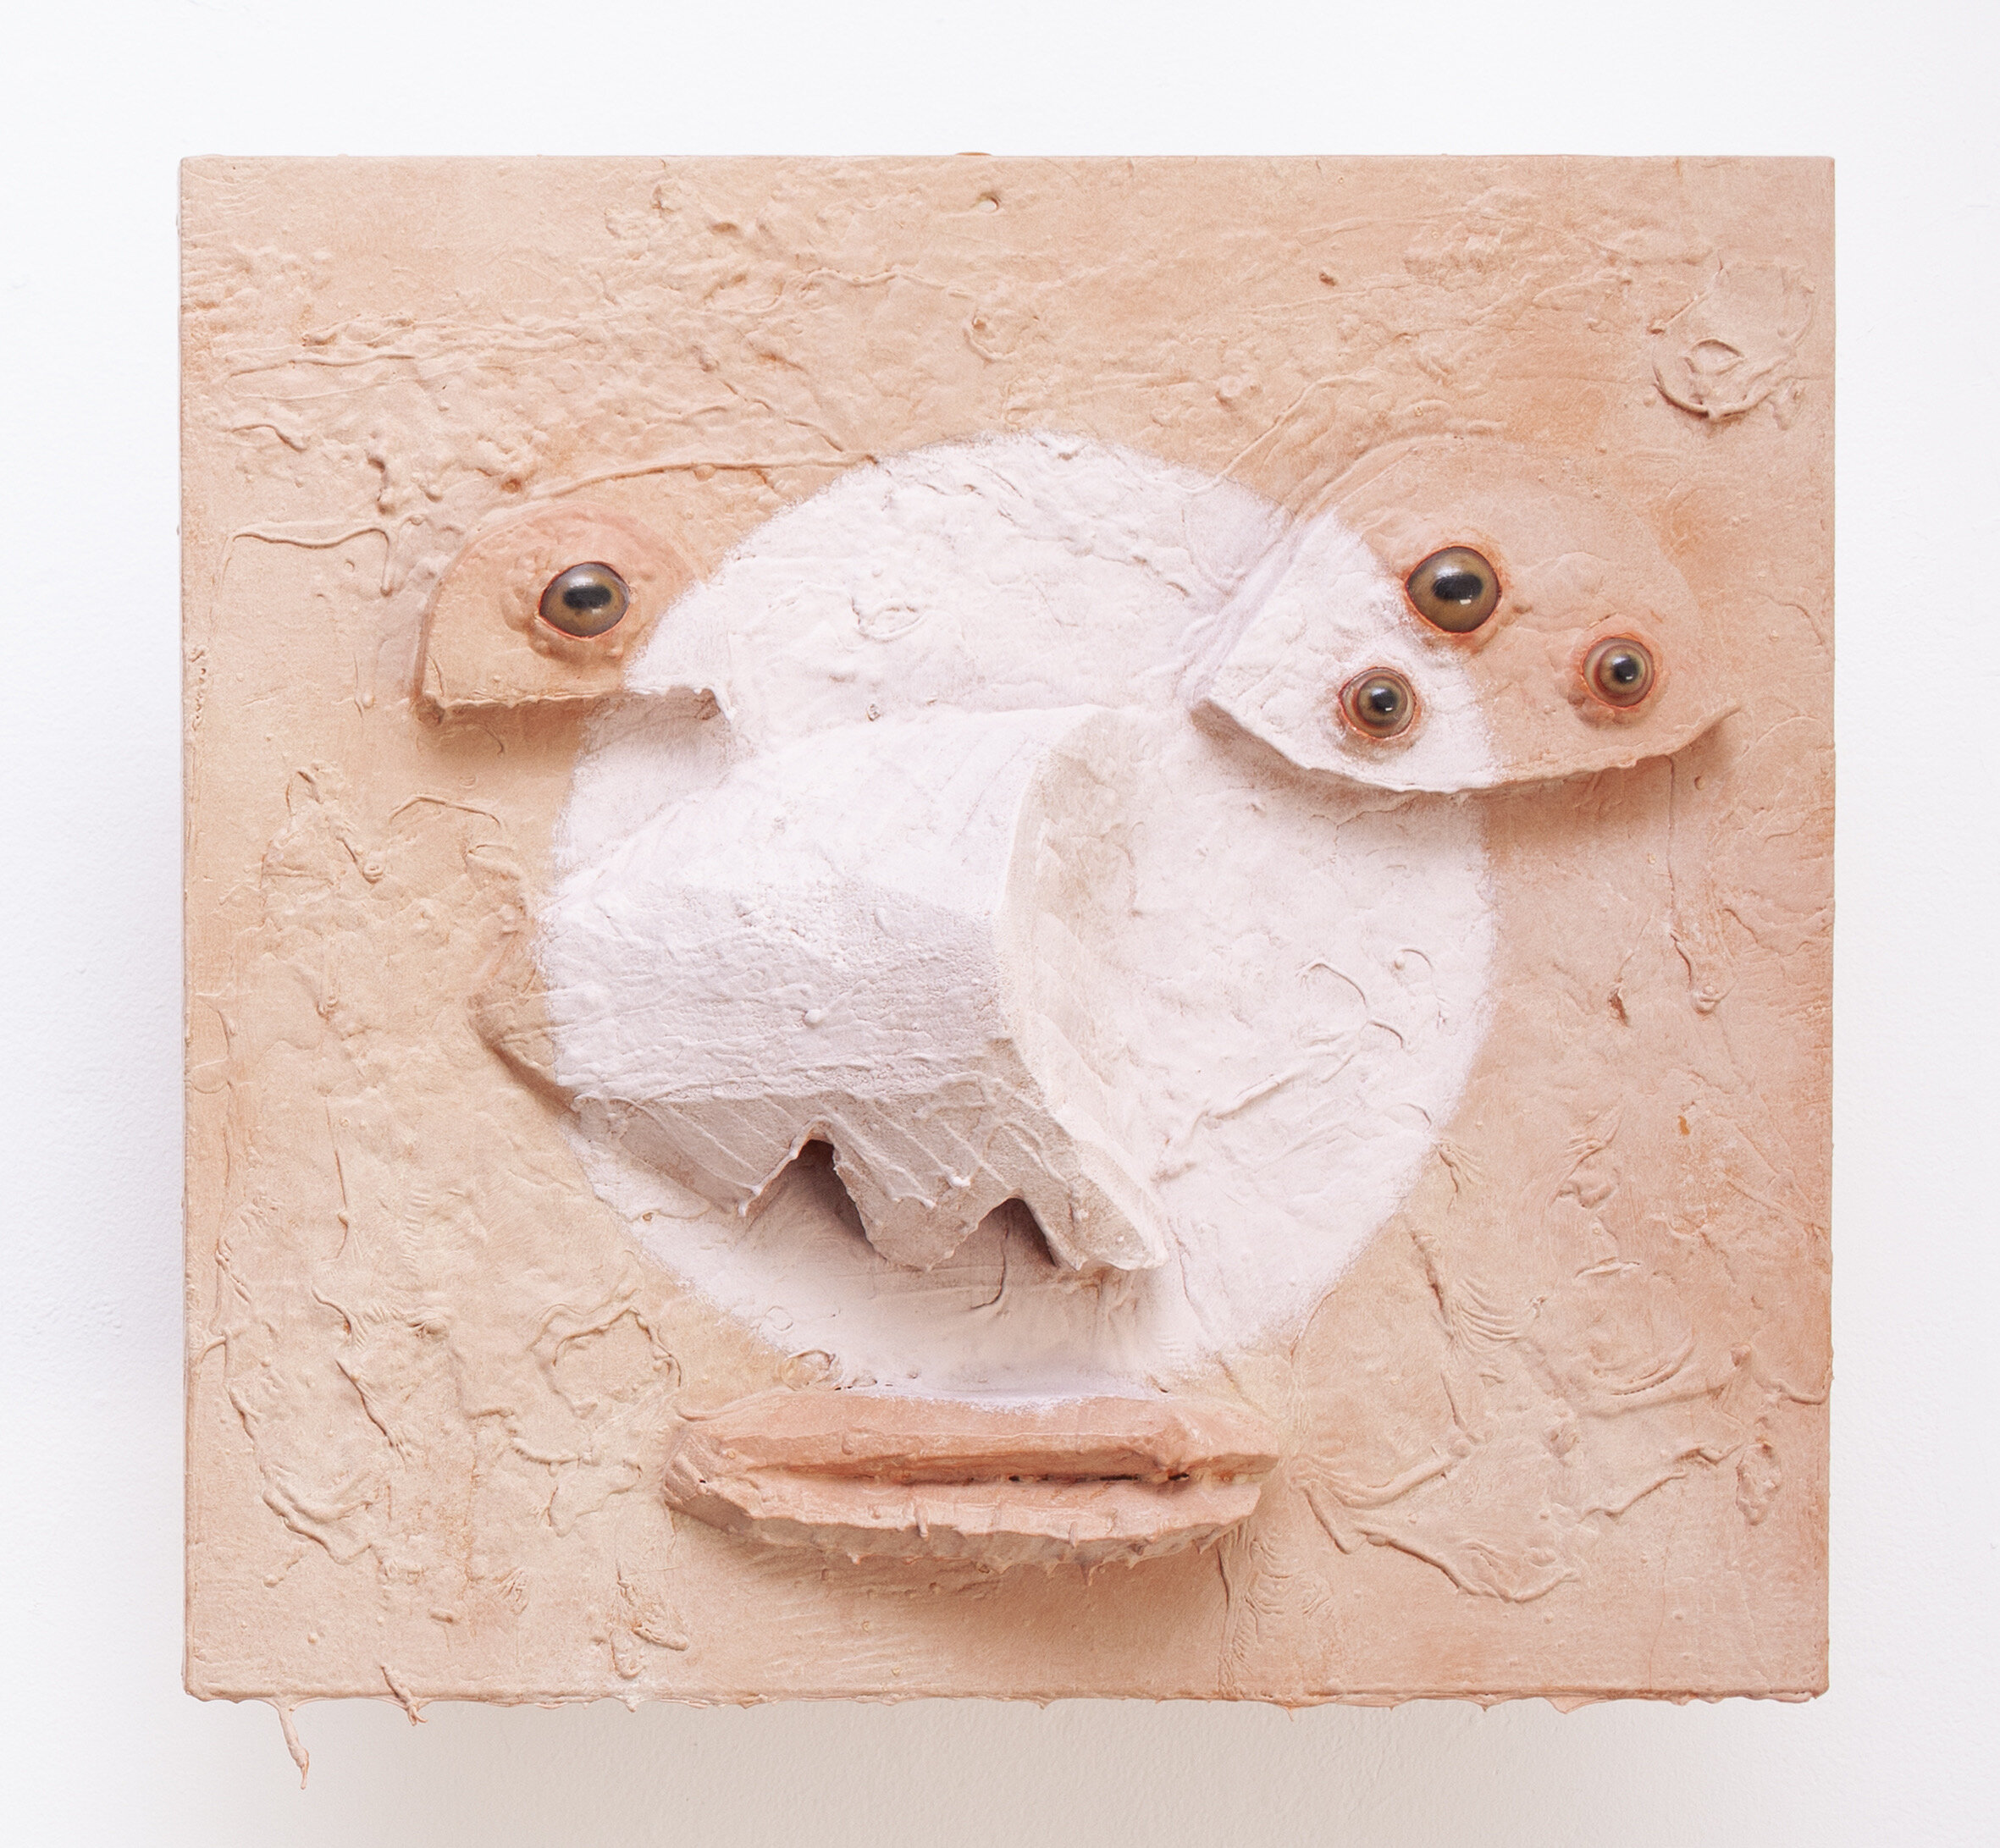   Caucasoid Facial Abstraction    2015   Acrylic on wood   22 x 25 x 6 inches     